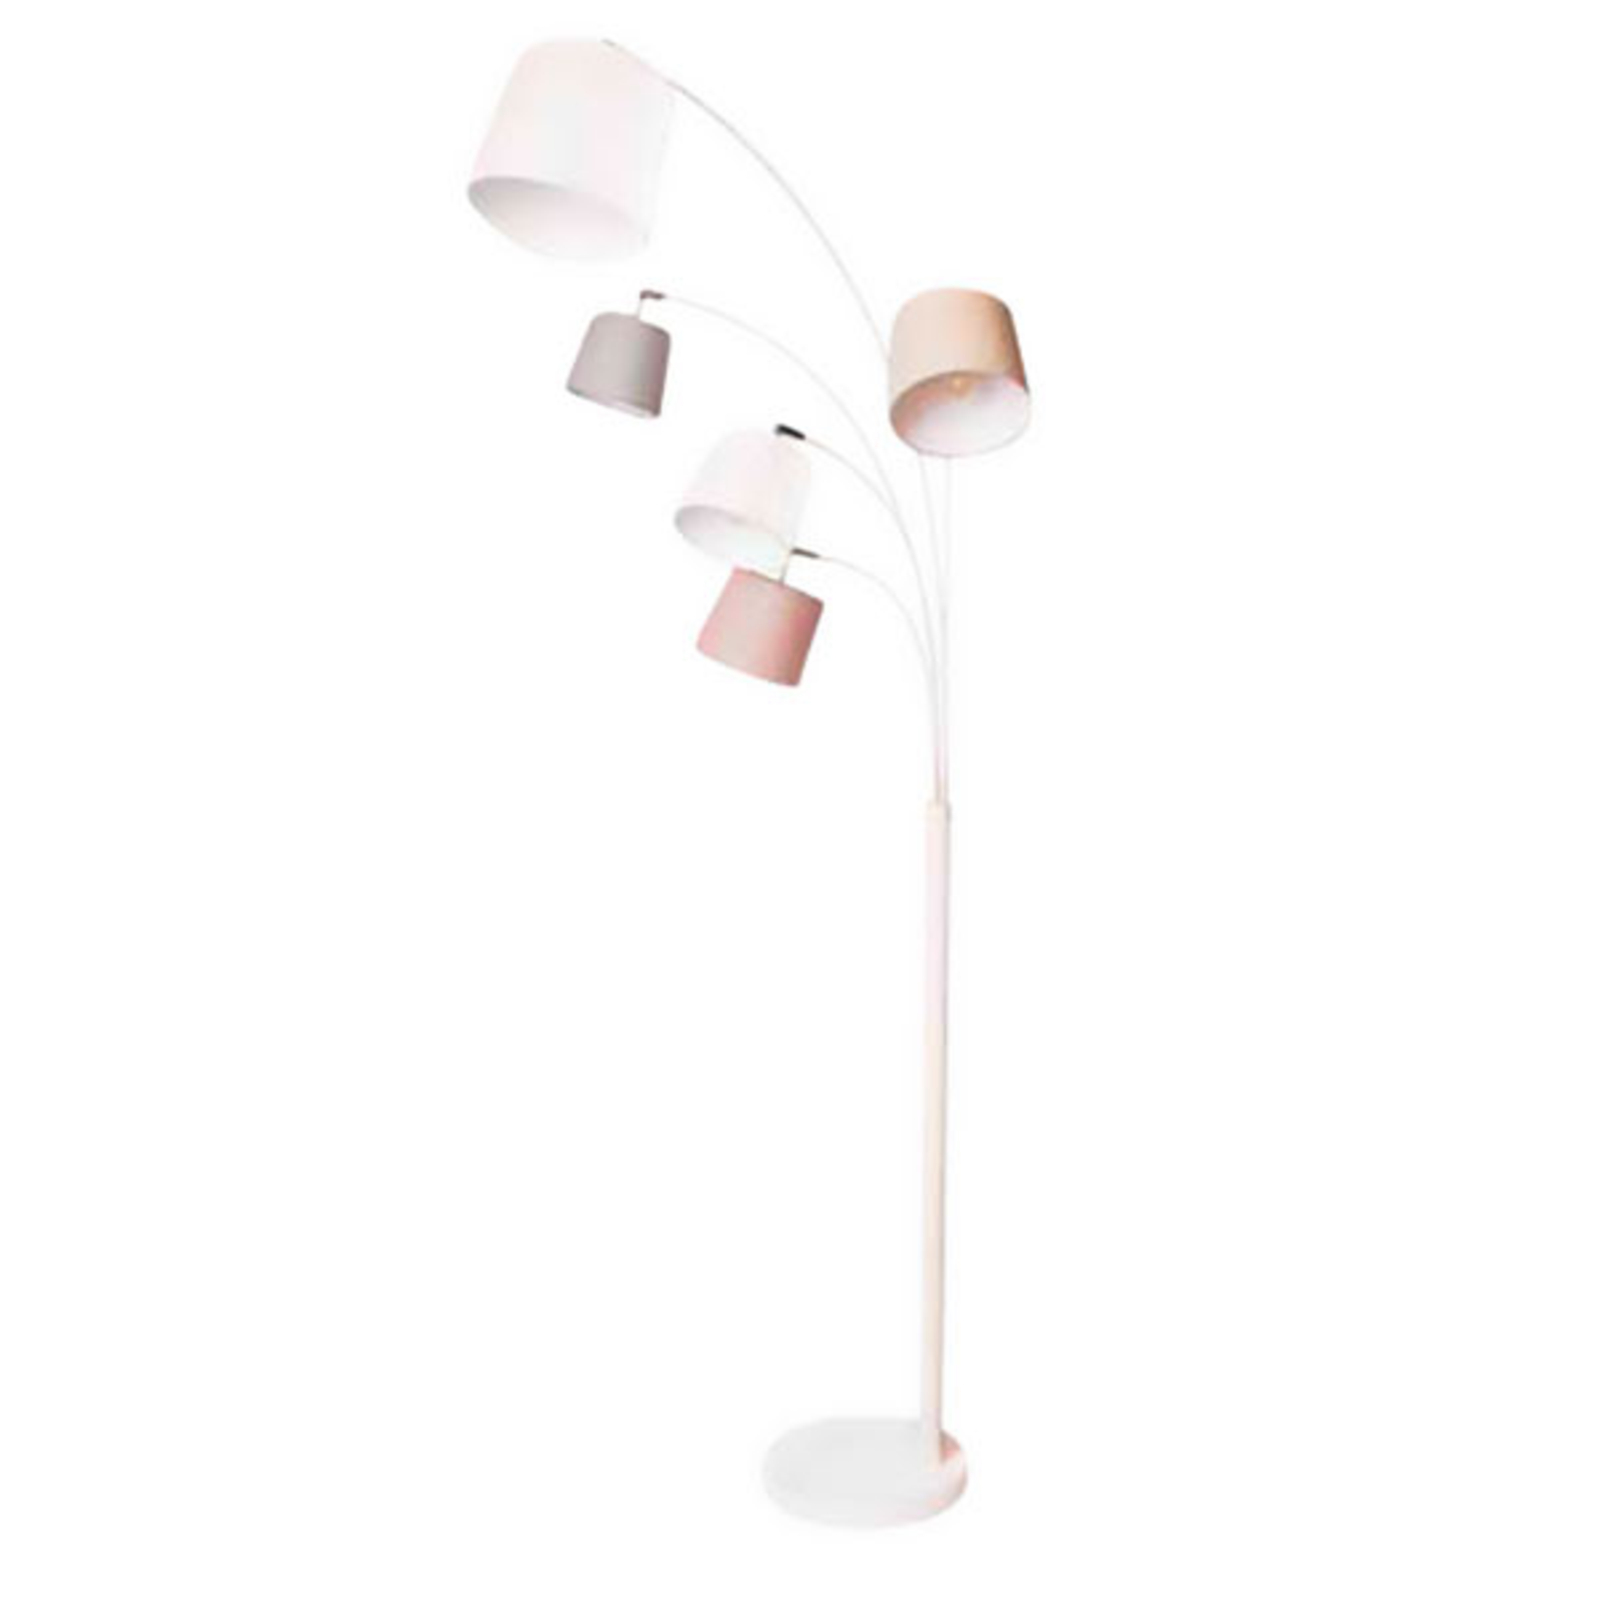 By Rydéns Foggy floor lamp, five lampshades, white